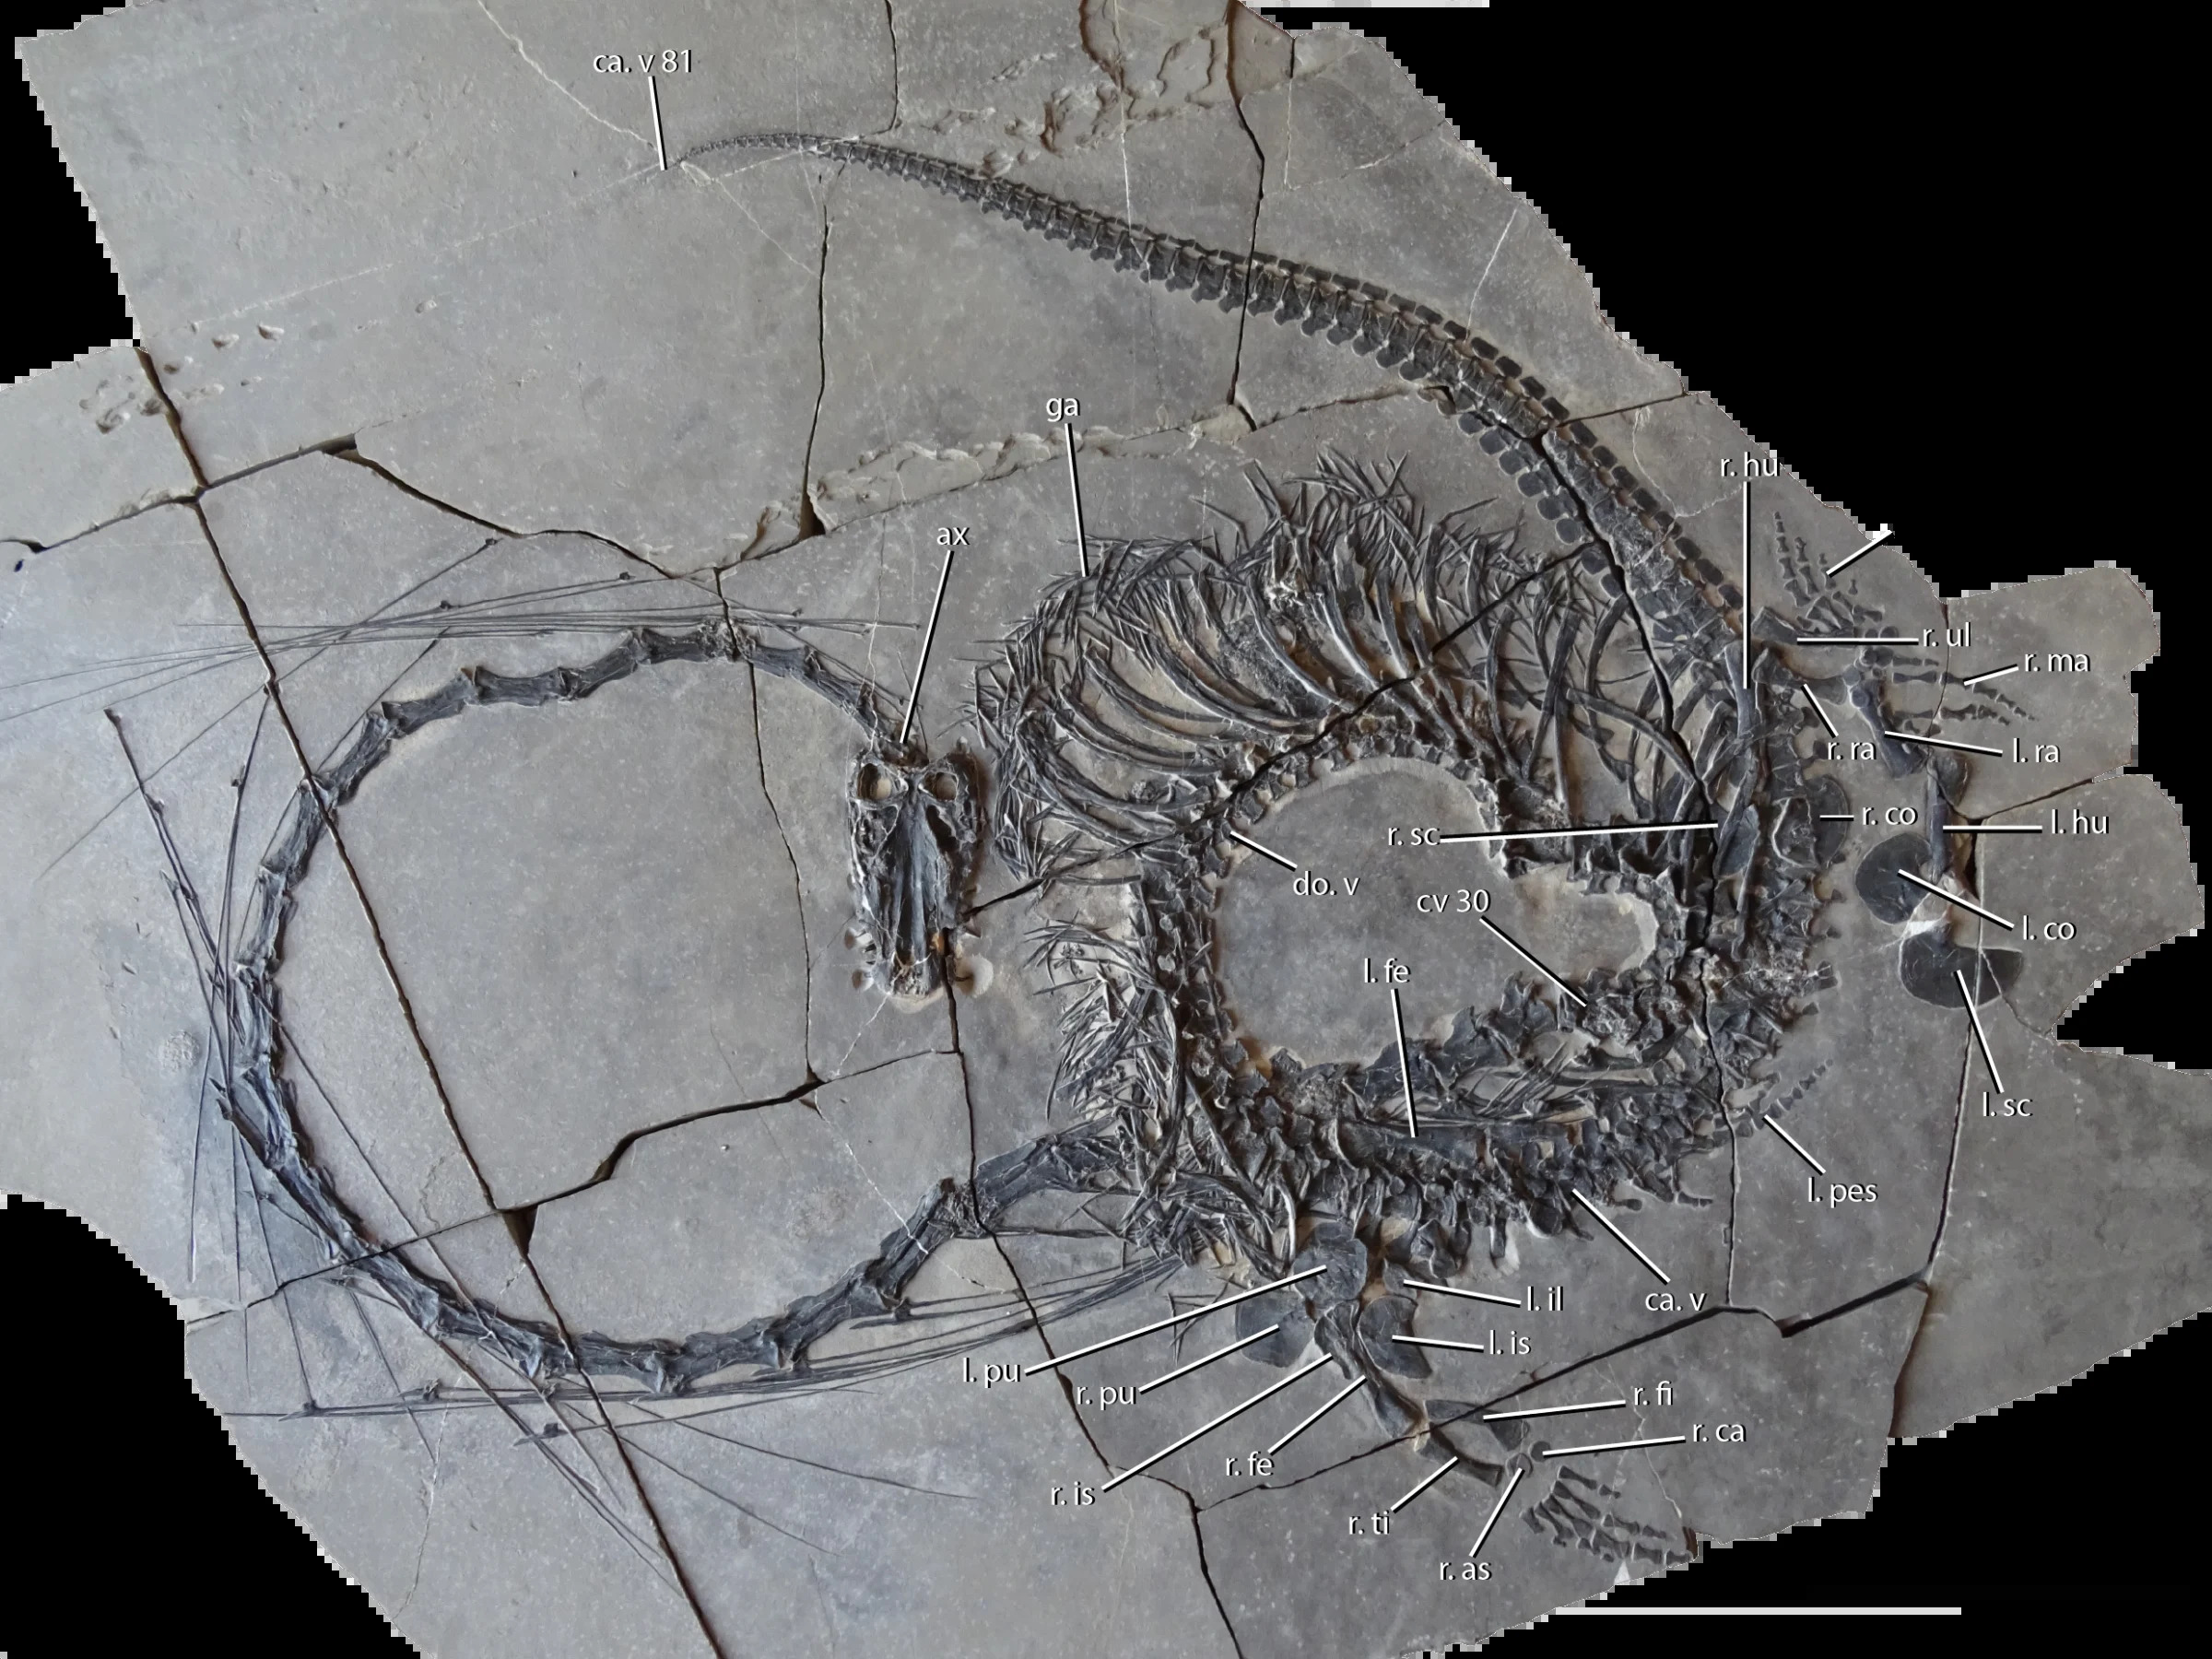 The 240-million-year-old fossil is 16 feet long and has 32 separate neck vertebrae – an extremely long neck. / Credit: National Museums of Scotland